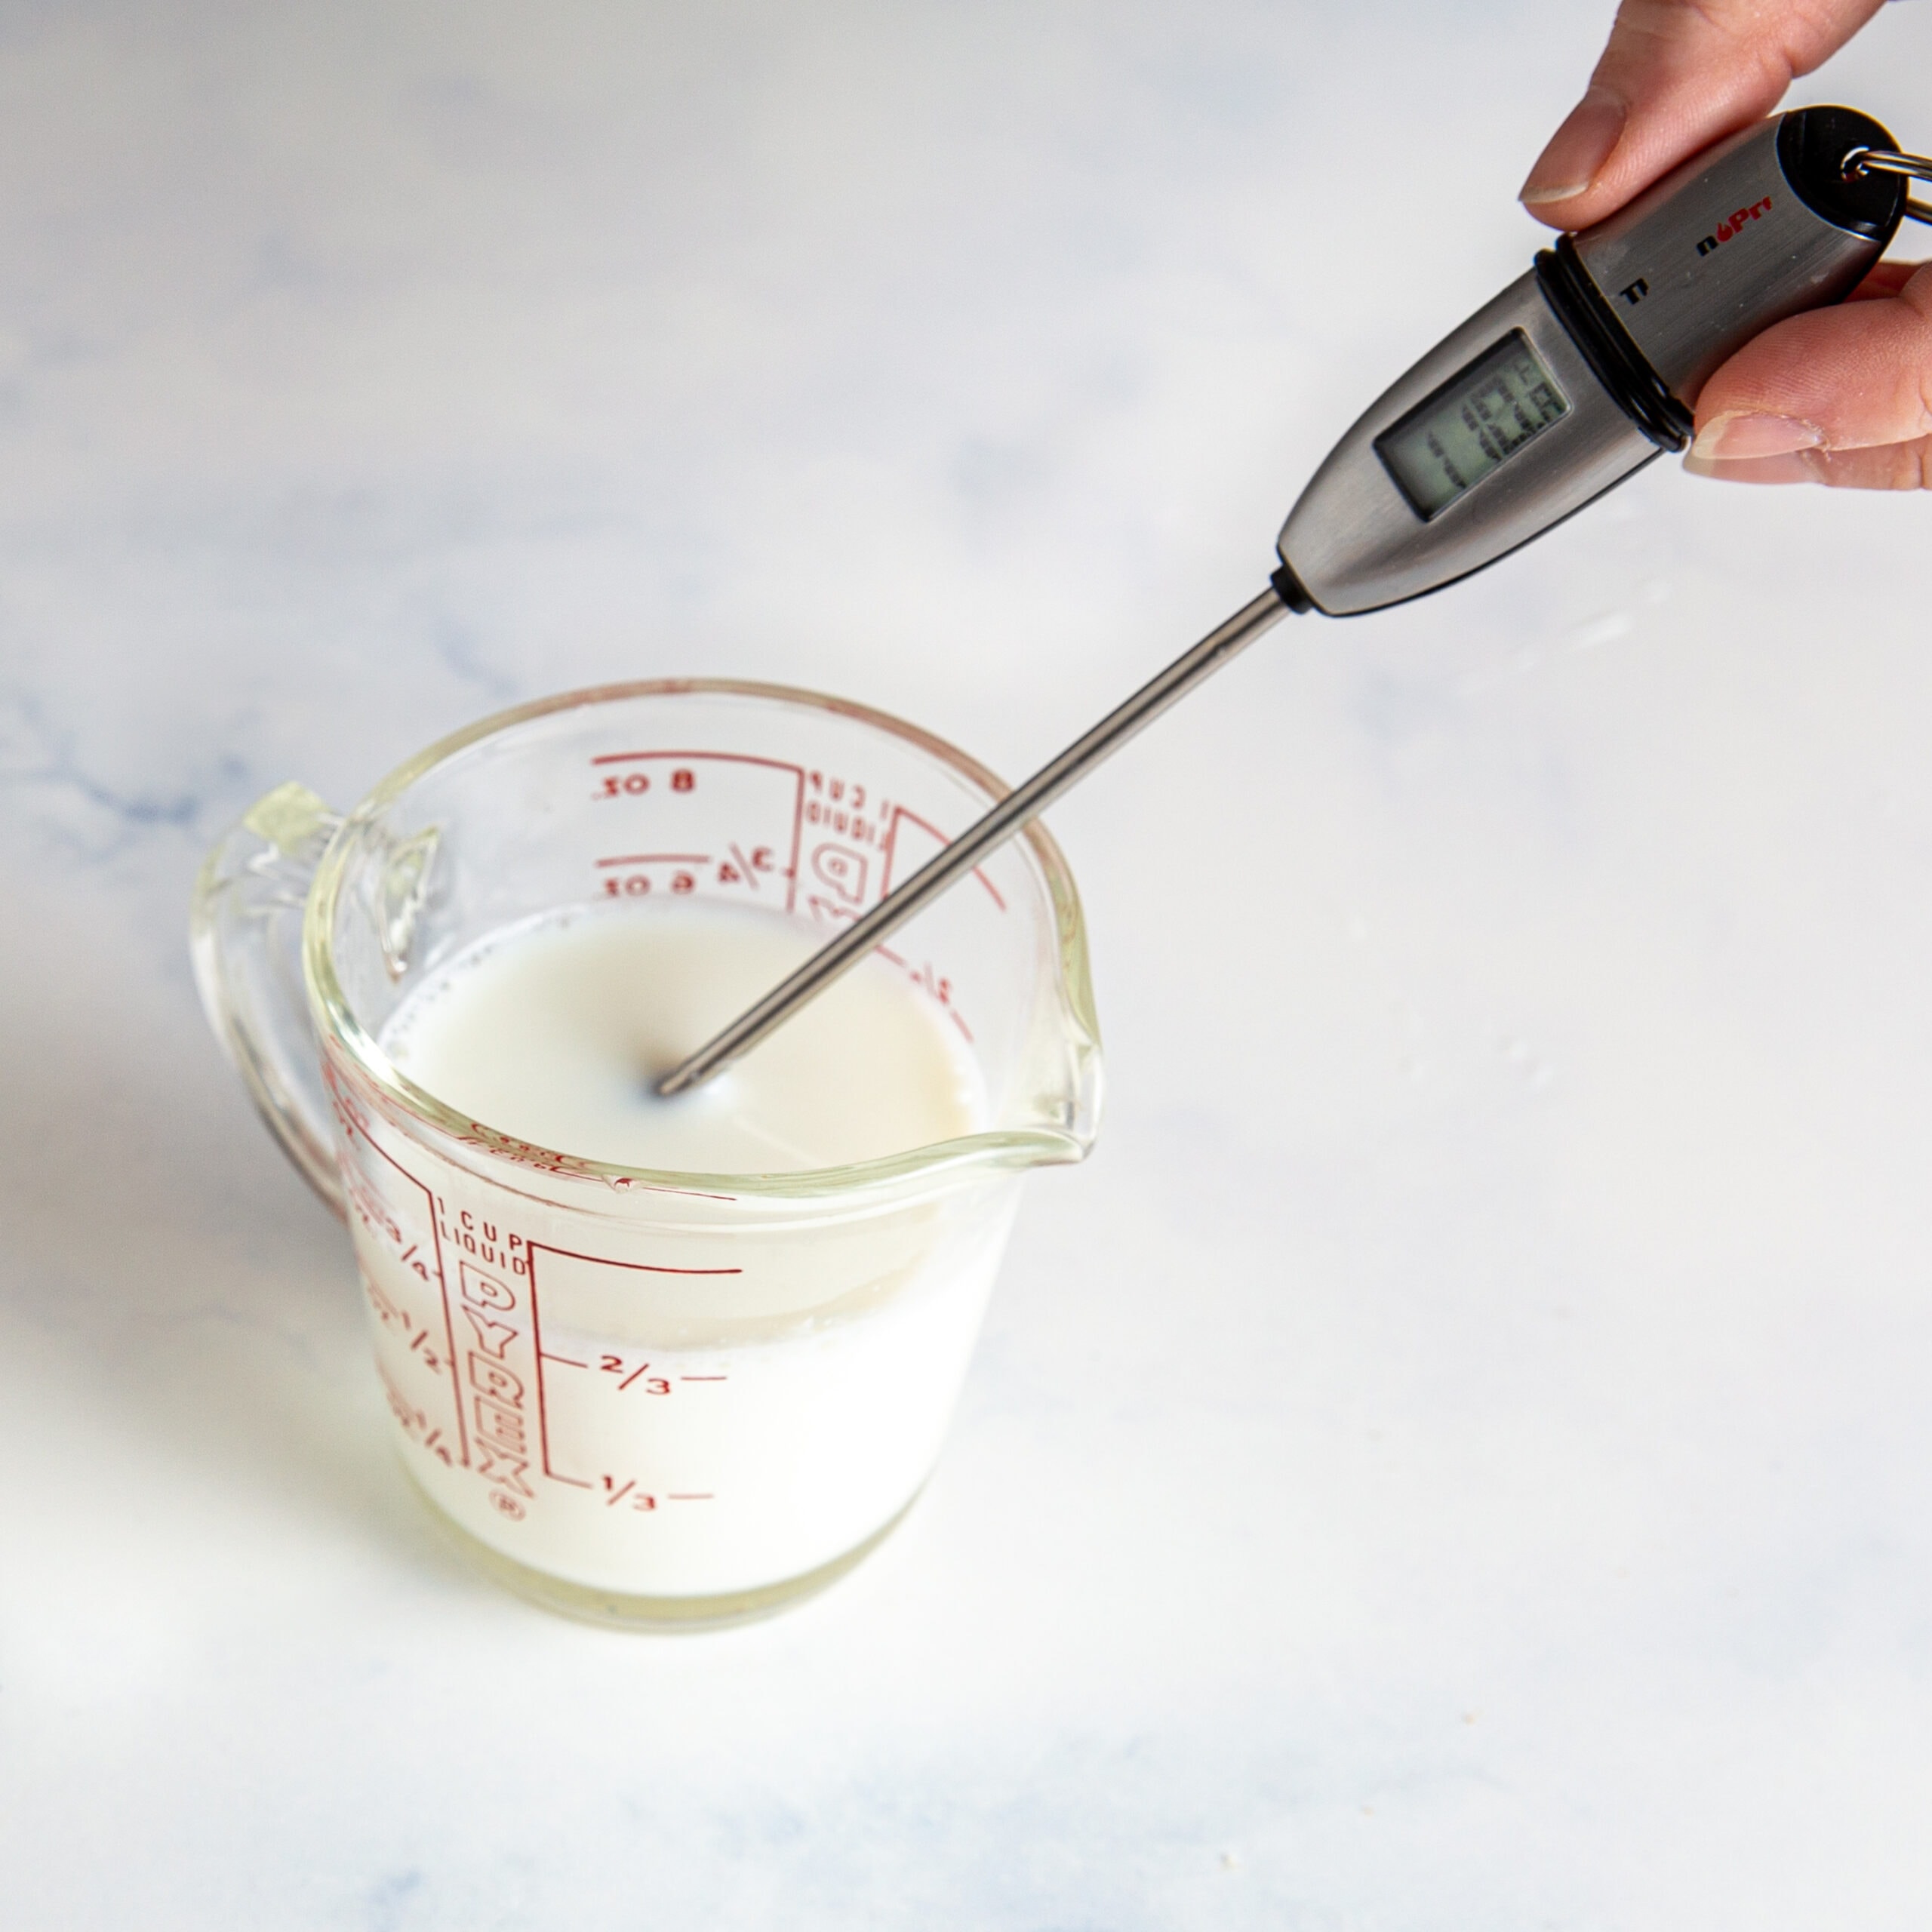 A thermometer taking the temperature of milk in a measuring cup